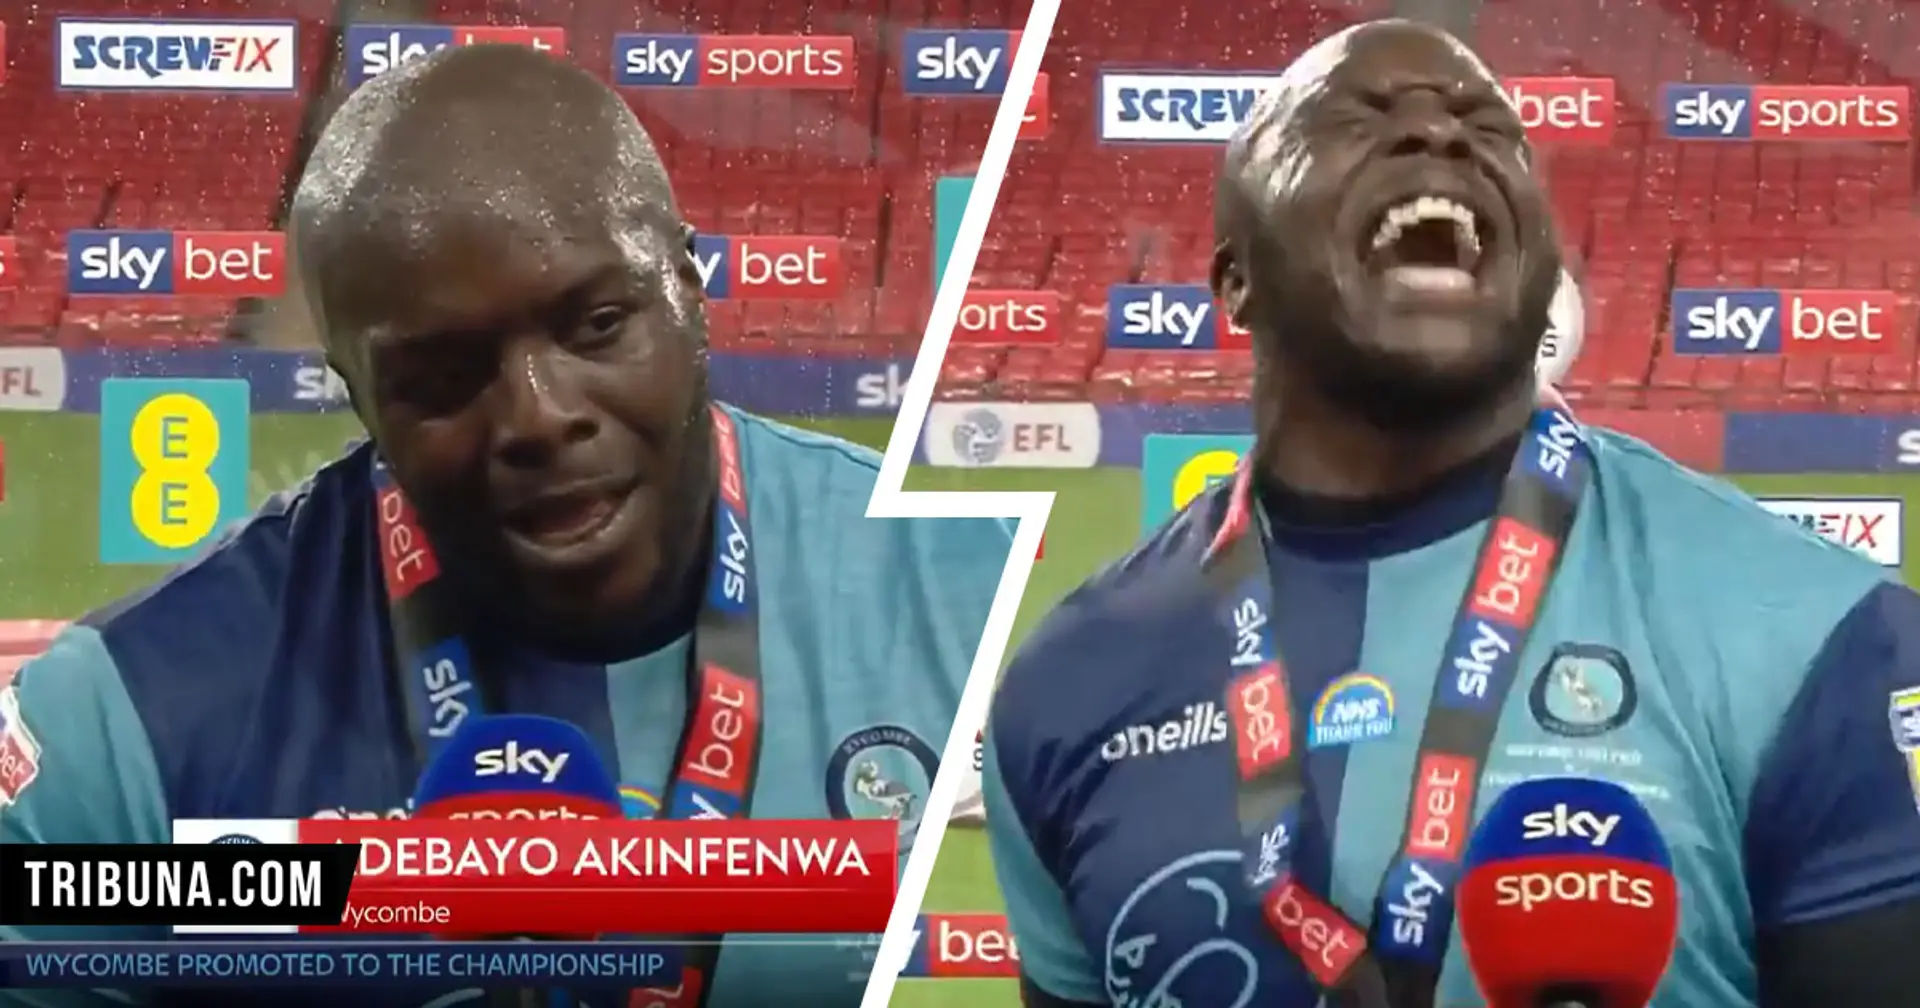 Reds fan Akinfenwa after Wycombe's historic League One play-off triumph: 'The only person who can WhatsApp me tonight is Klopp so we can celebrate together!'